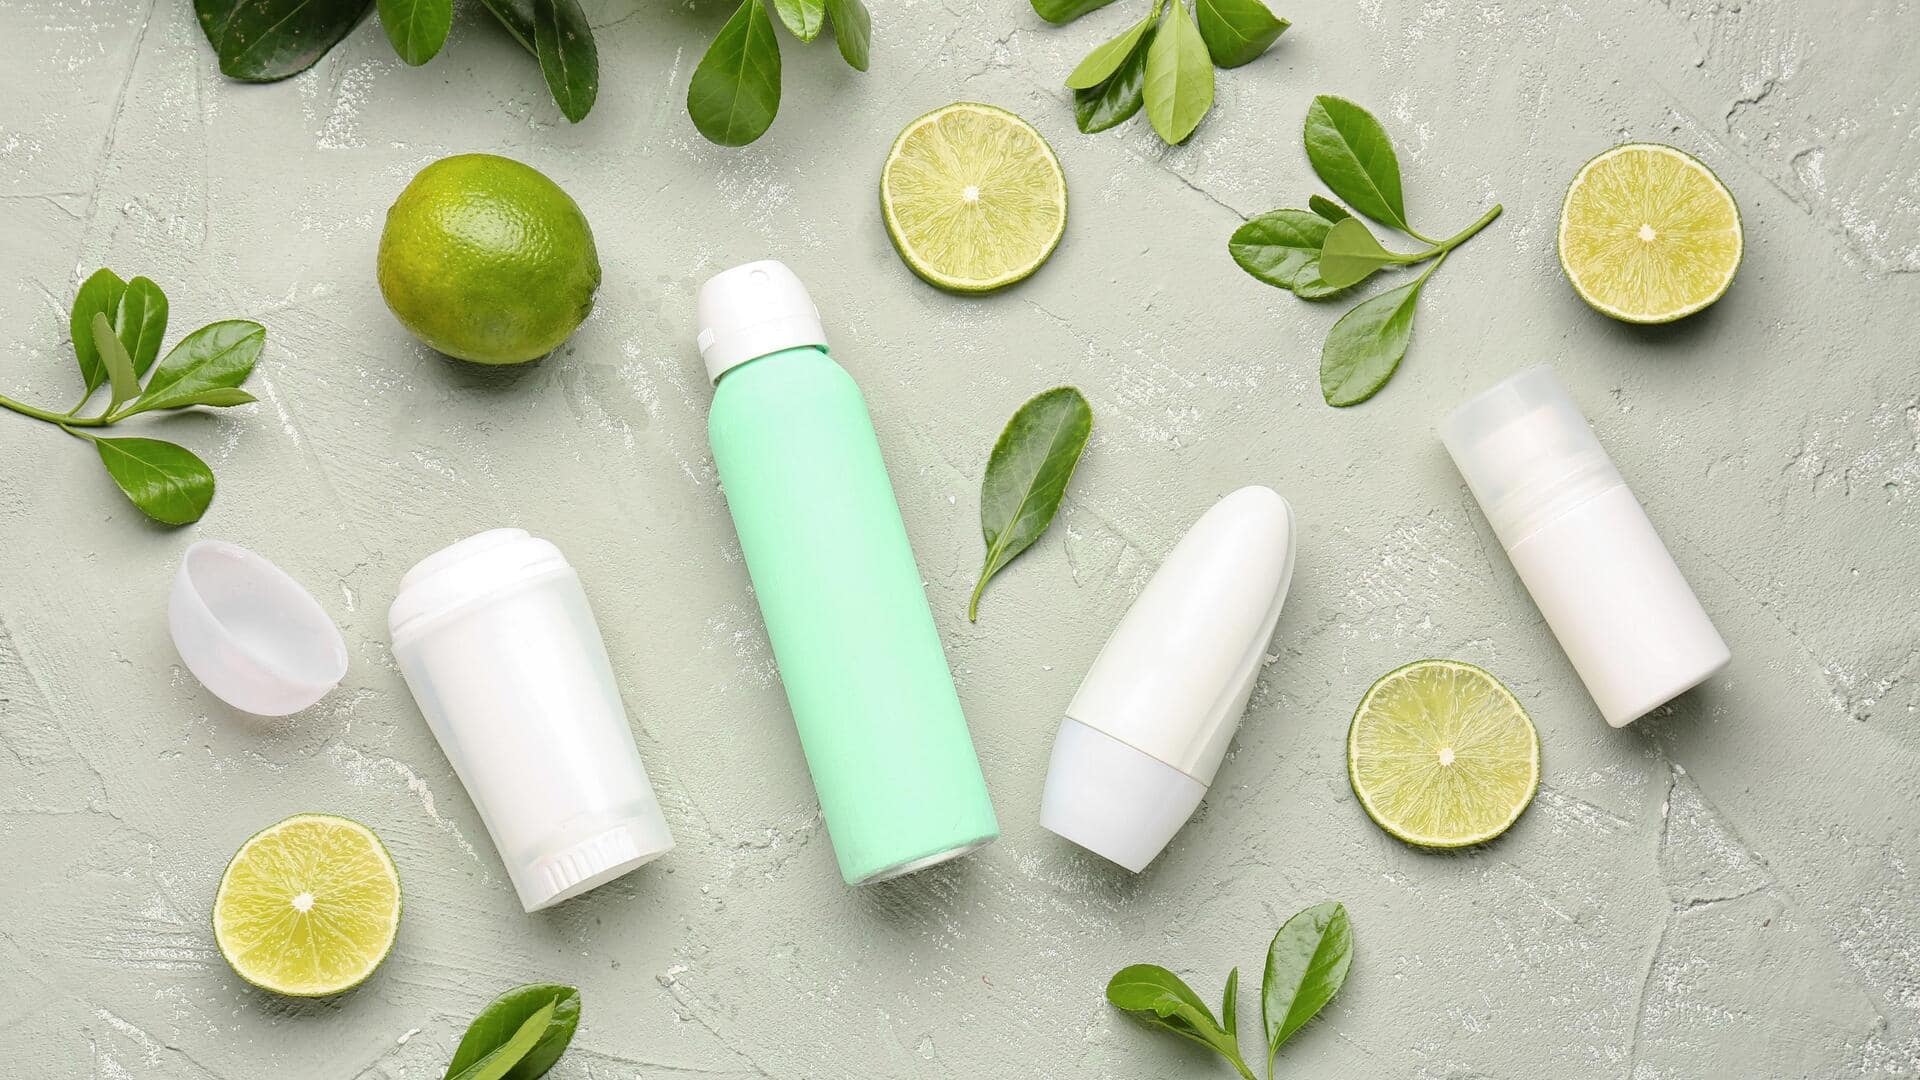 Perfume, roll-on, deodorant spray: Which is best for you?